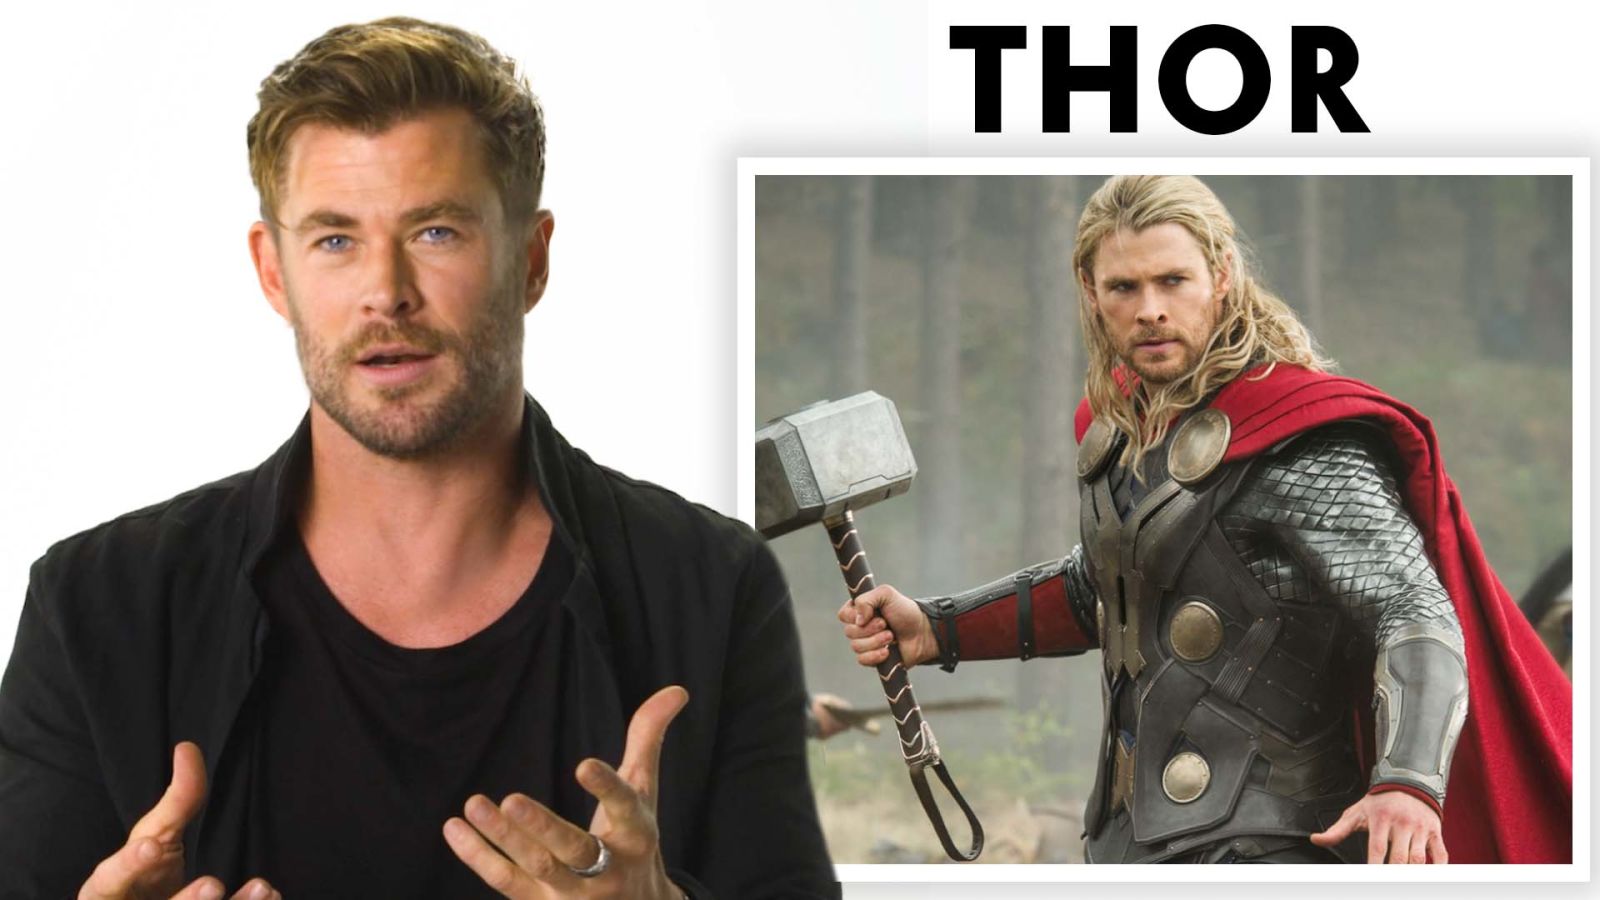 Chris Hemsworth Breaks Down His Career, from 'Thor' to 'Spiderhead'